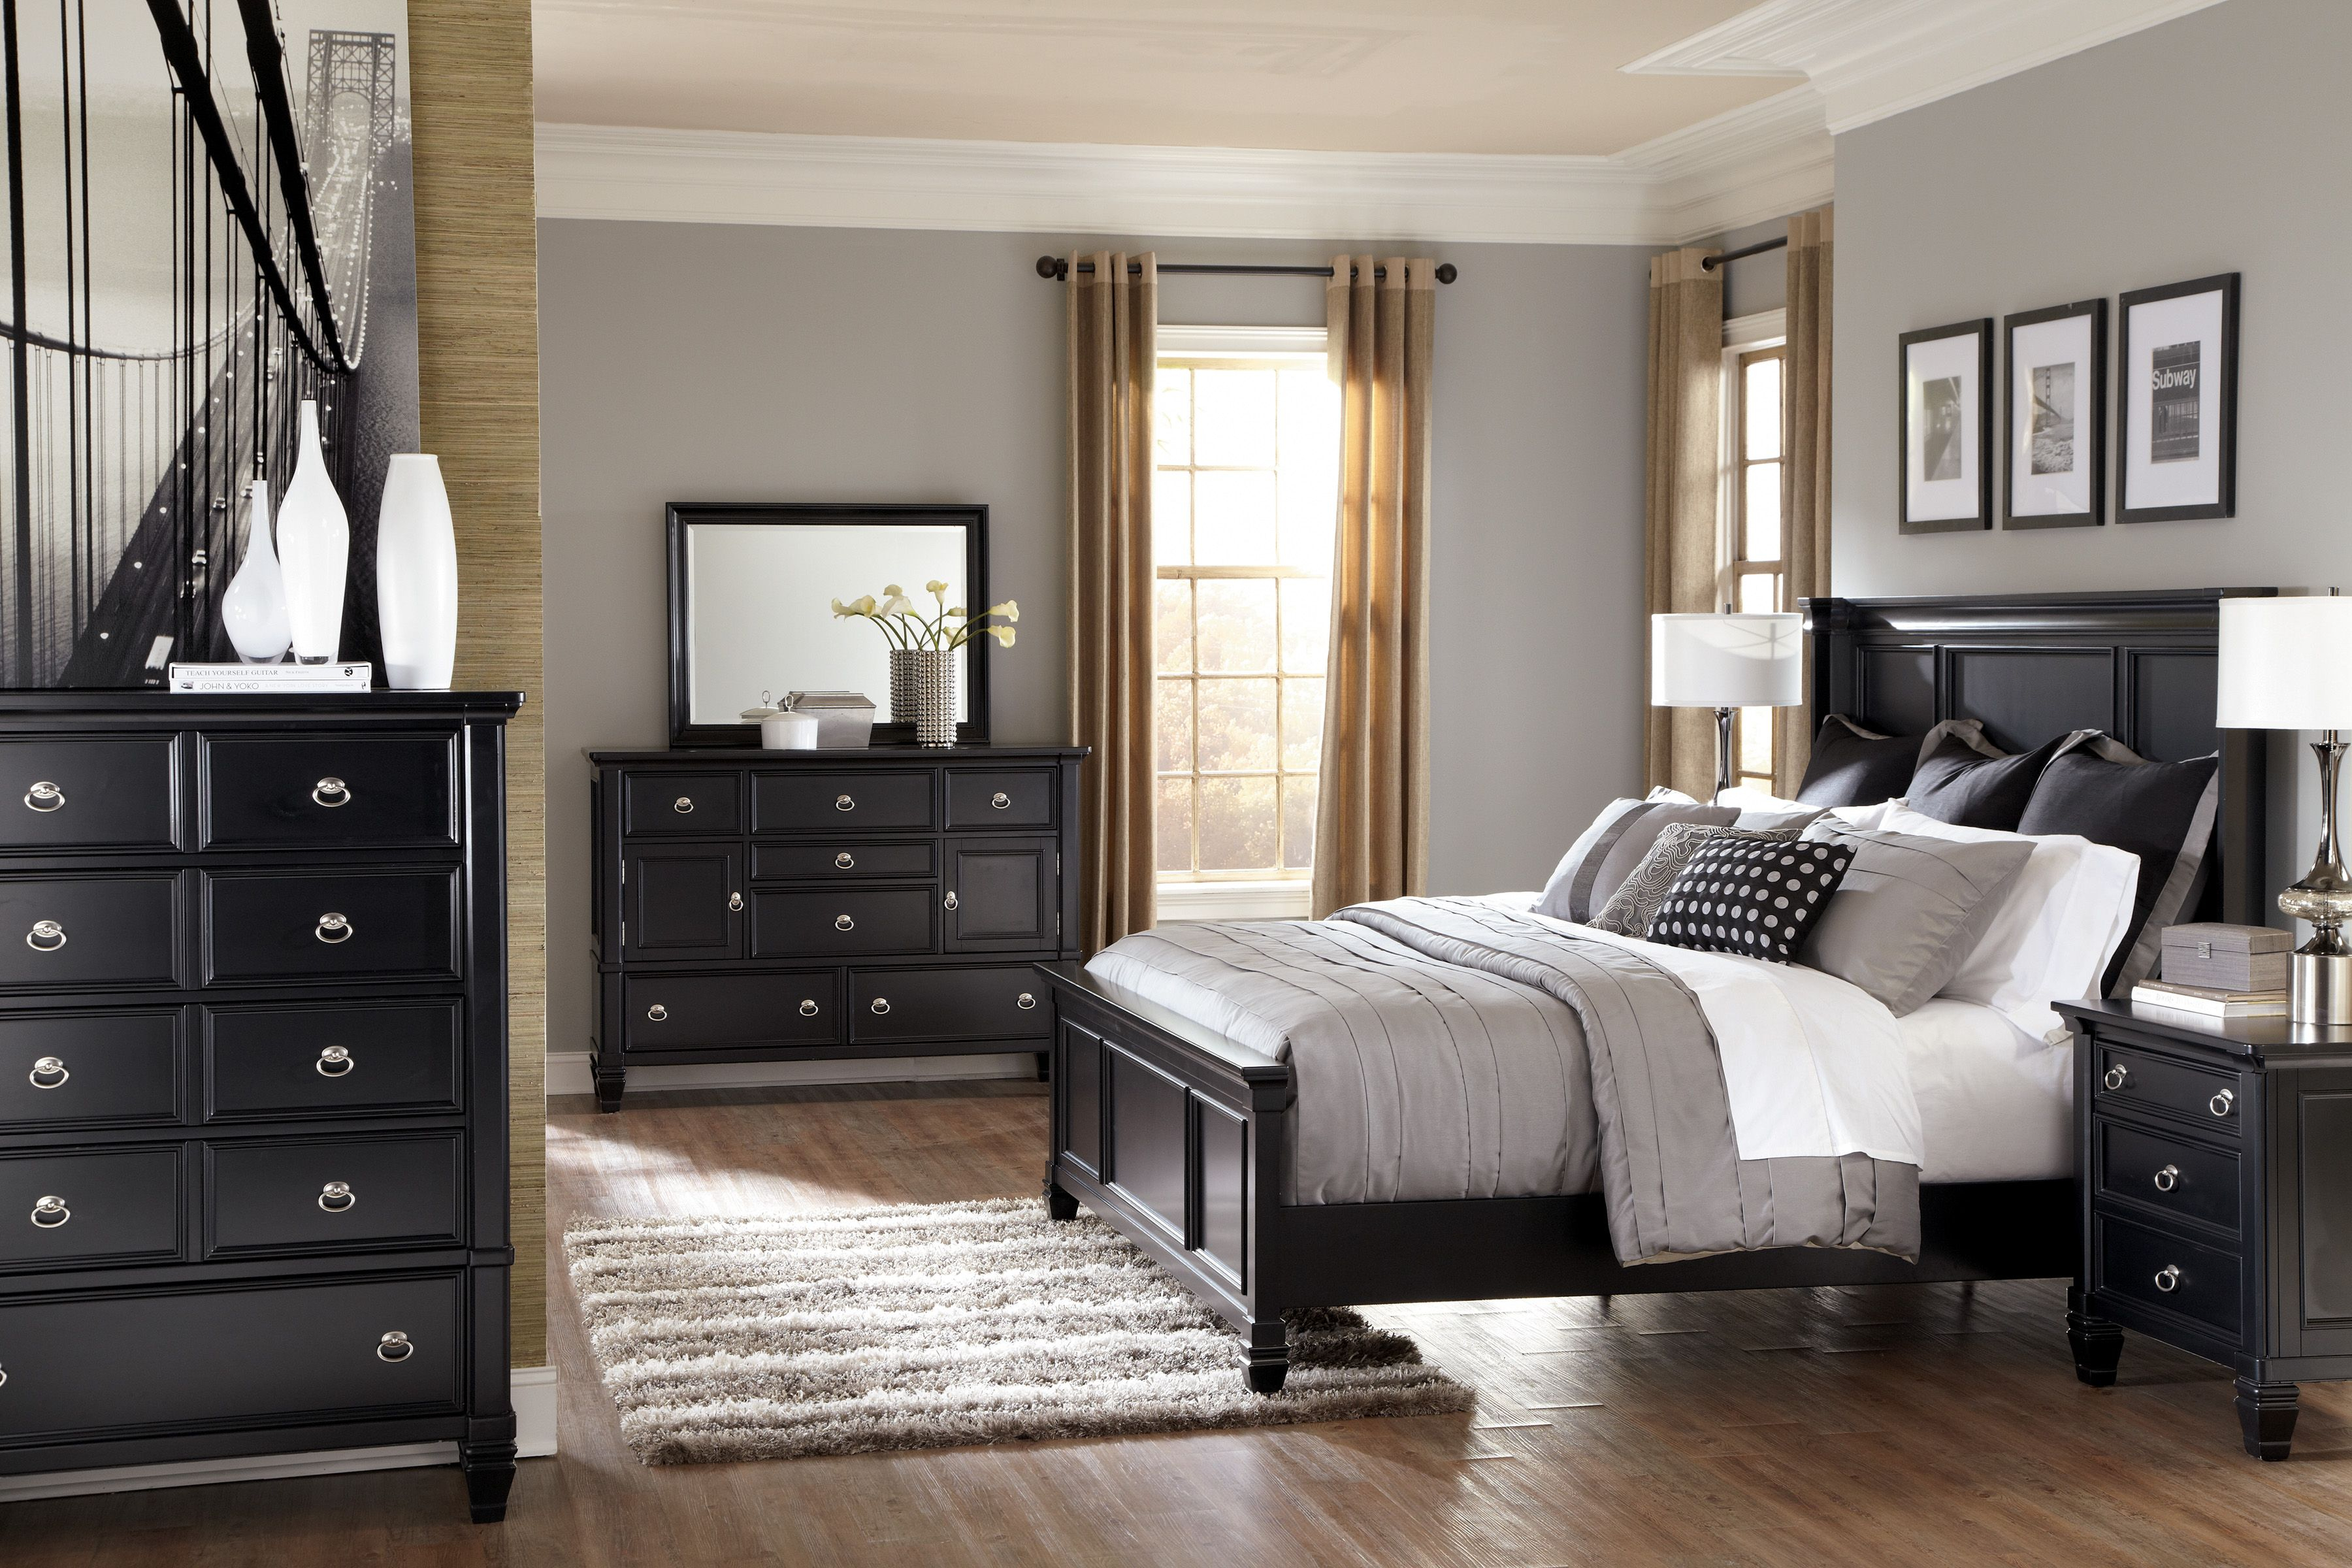 Greensburg 4 Piece Panel Bedroom Set In Black In 2019 New pertaining to sizing 3600 X 2400